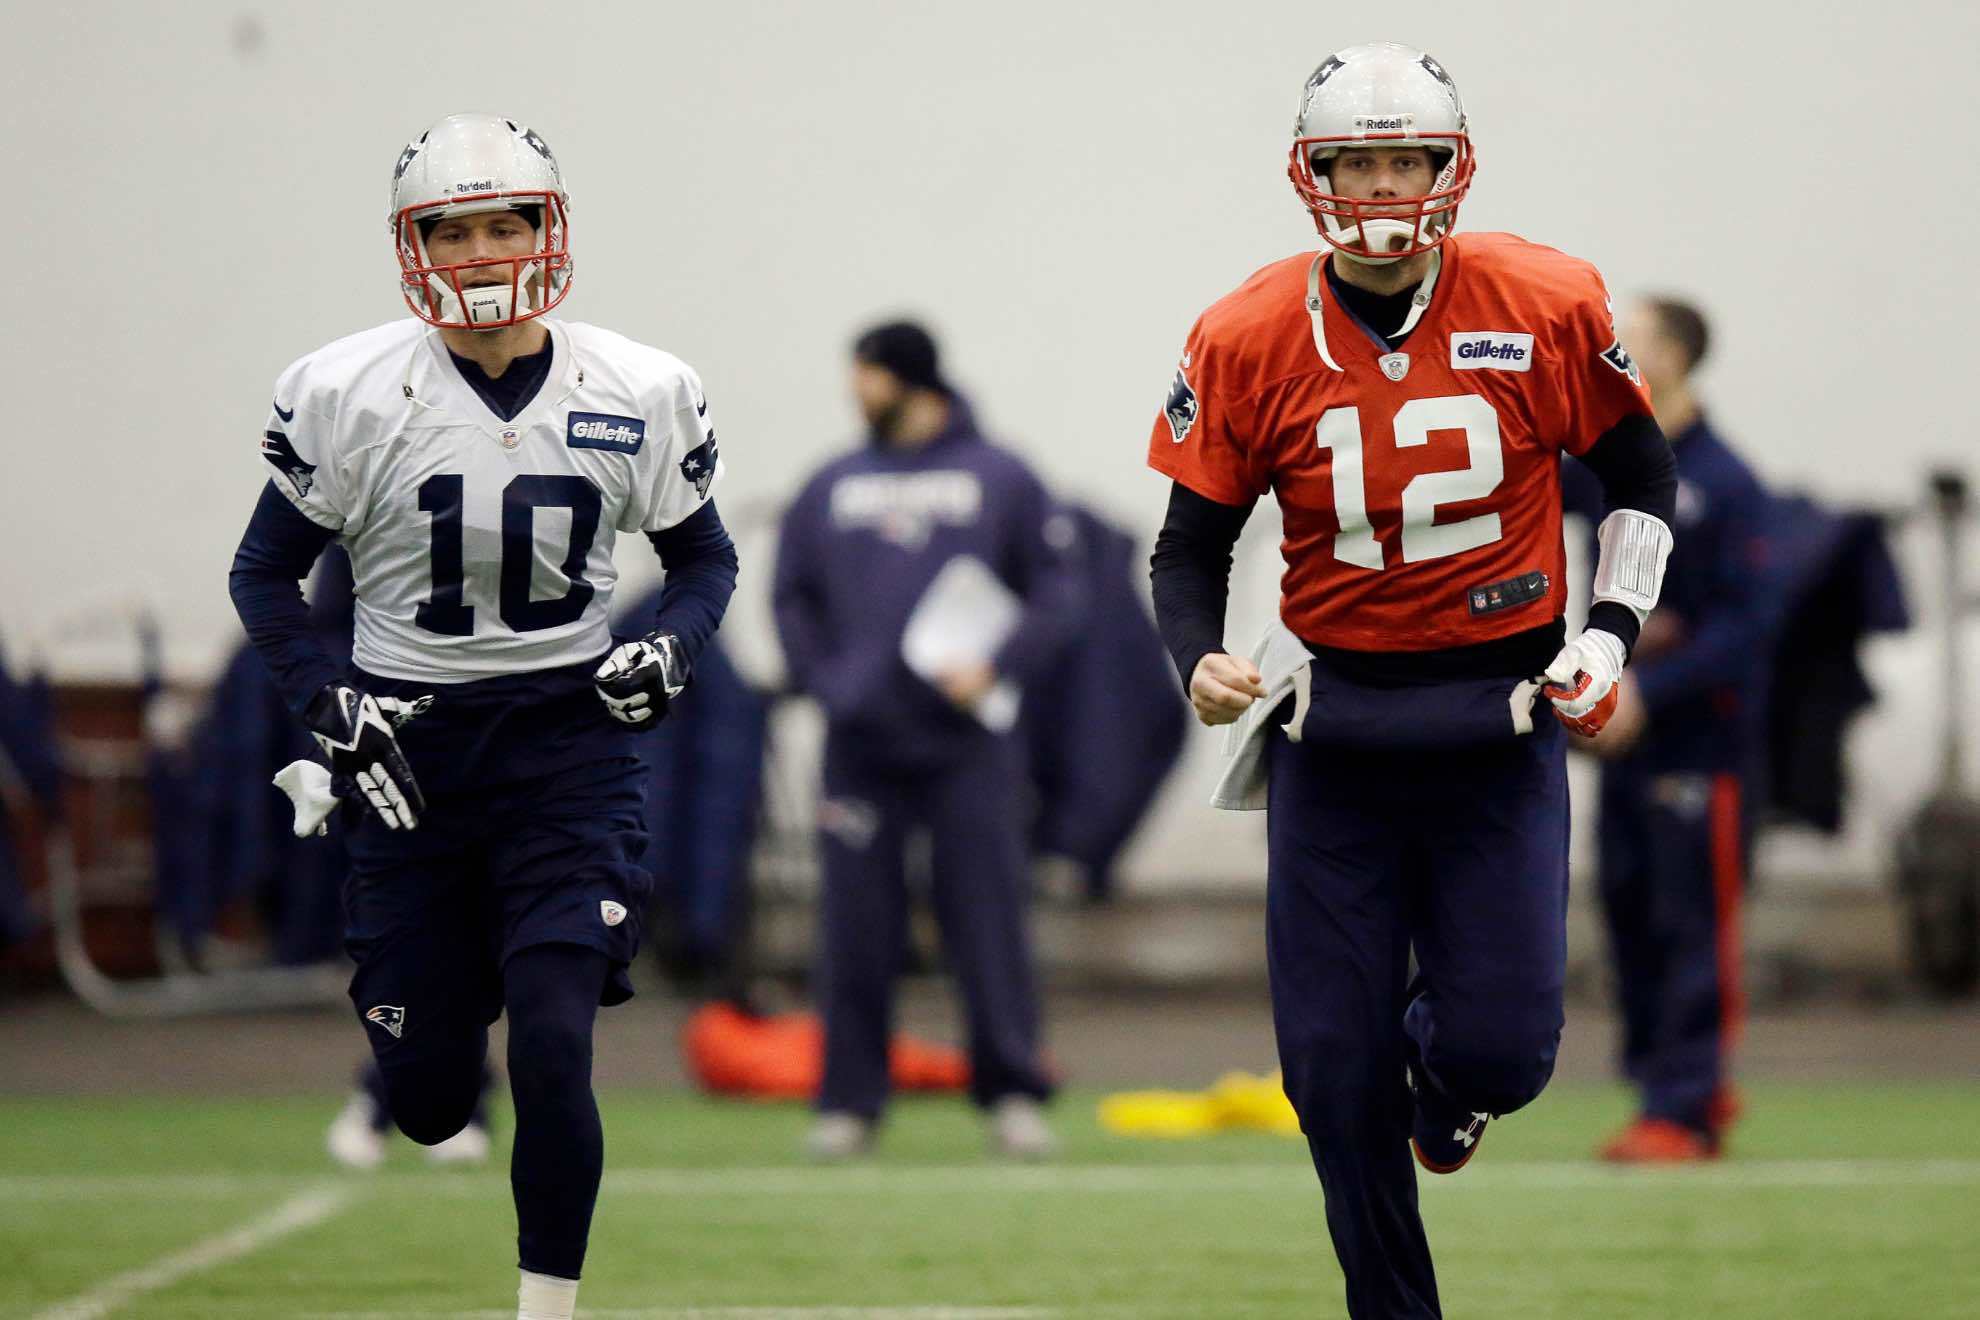 Tom Brady is still in great shape, but did he beat his original 40 yard dash time?